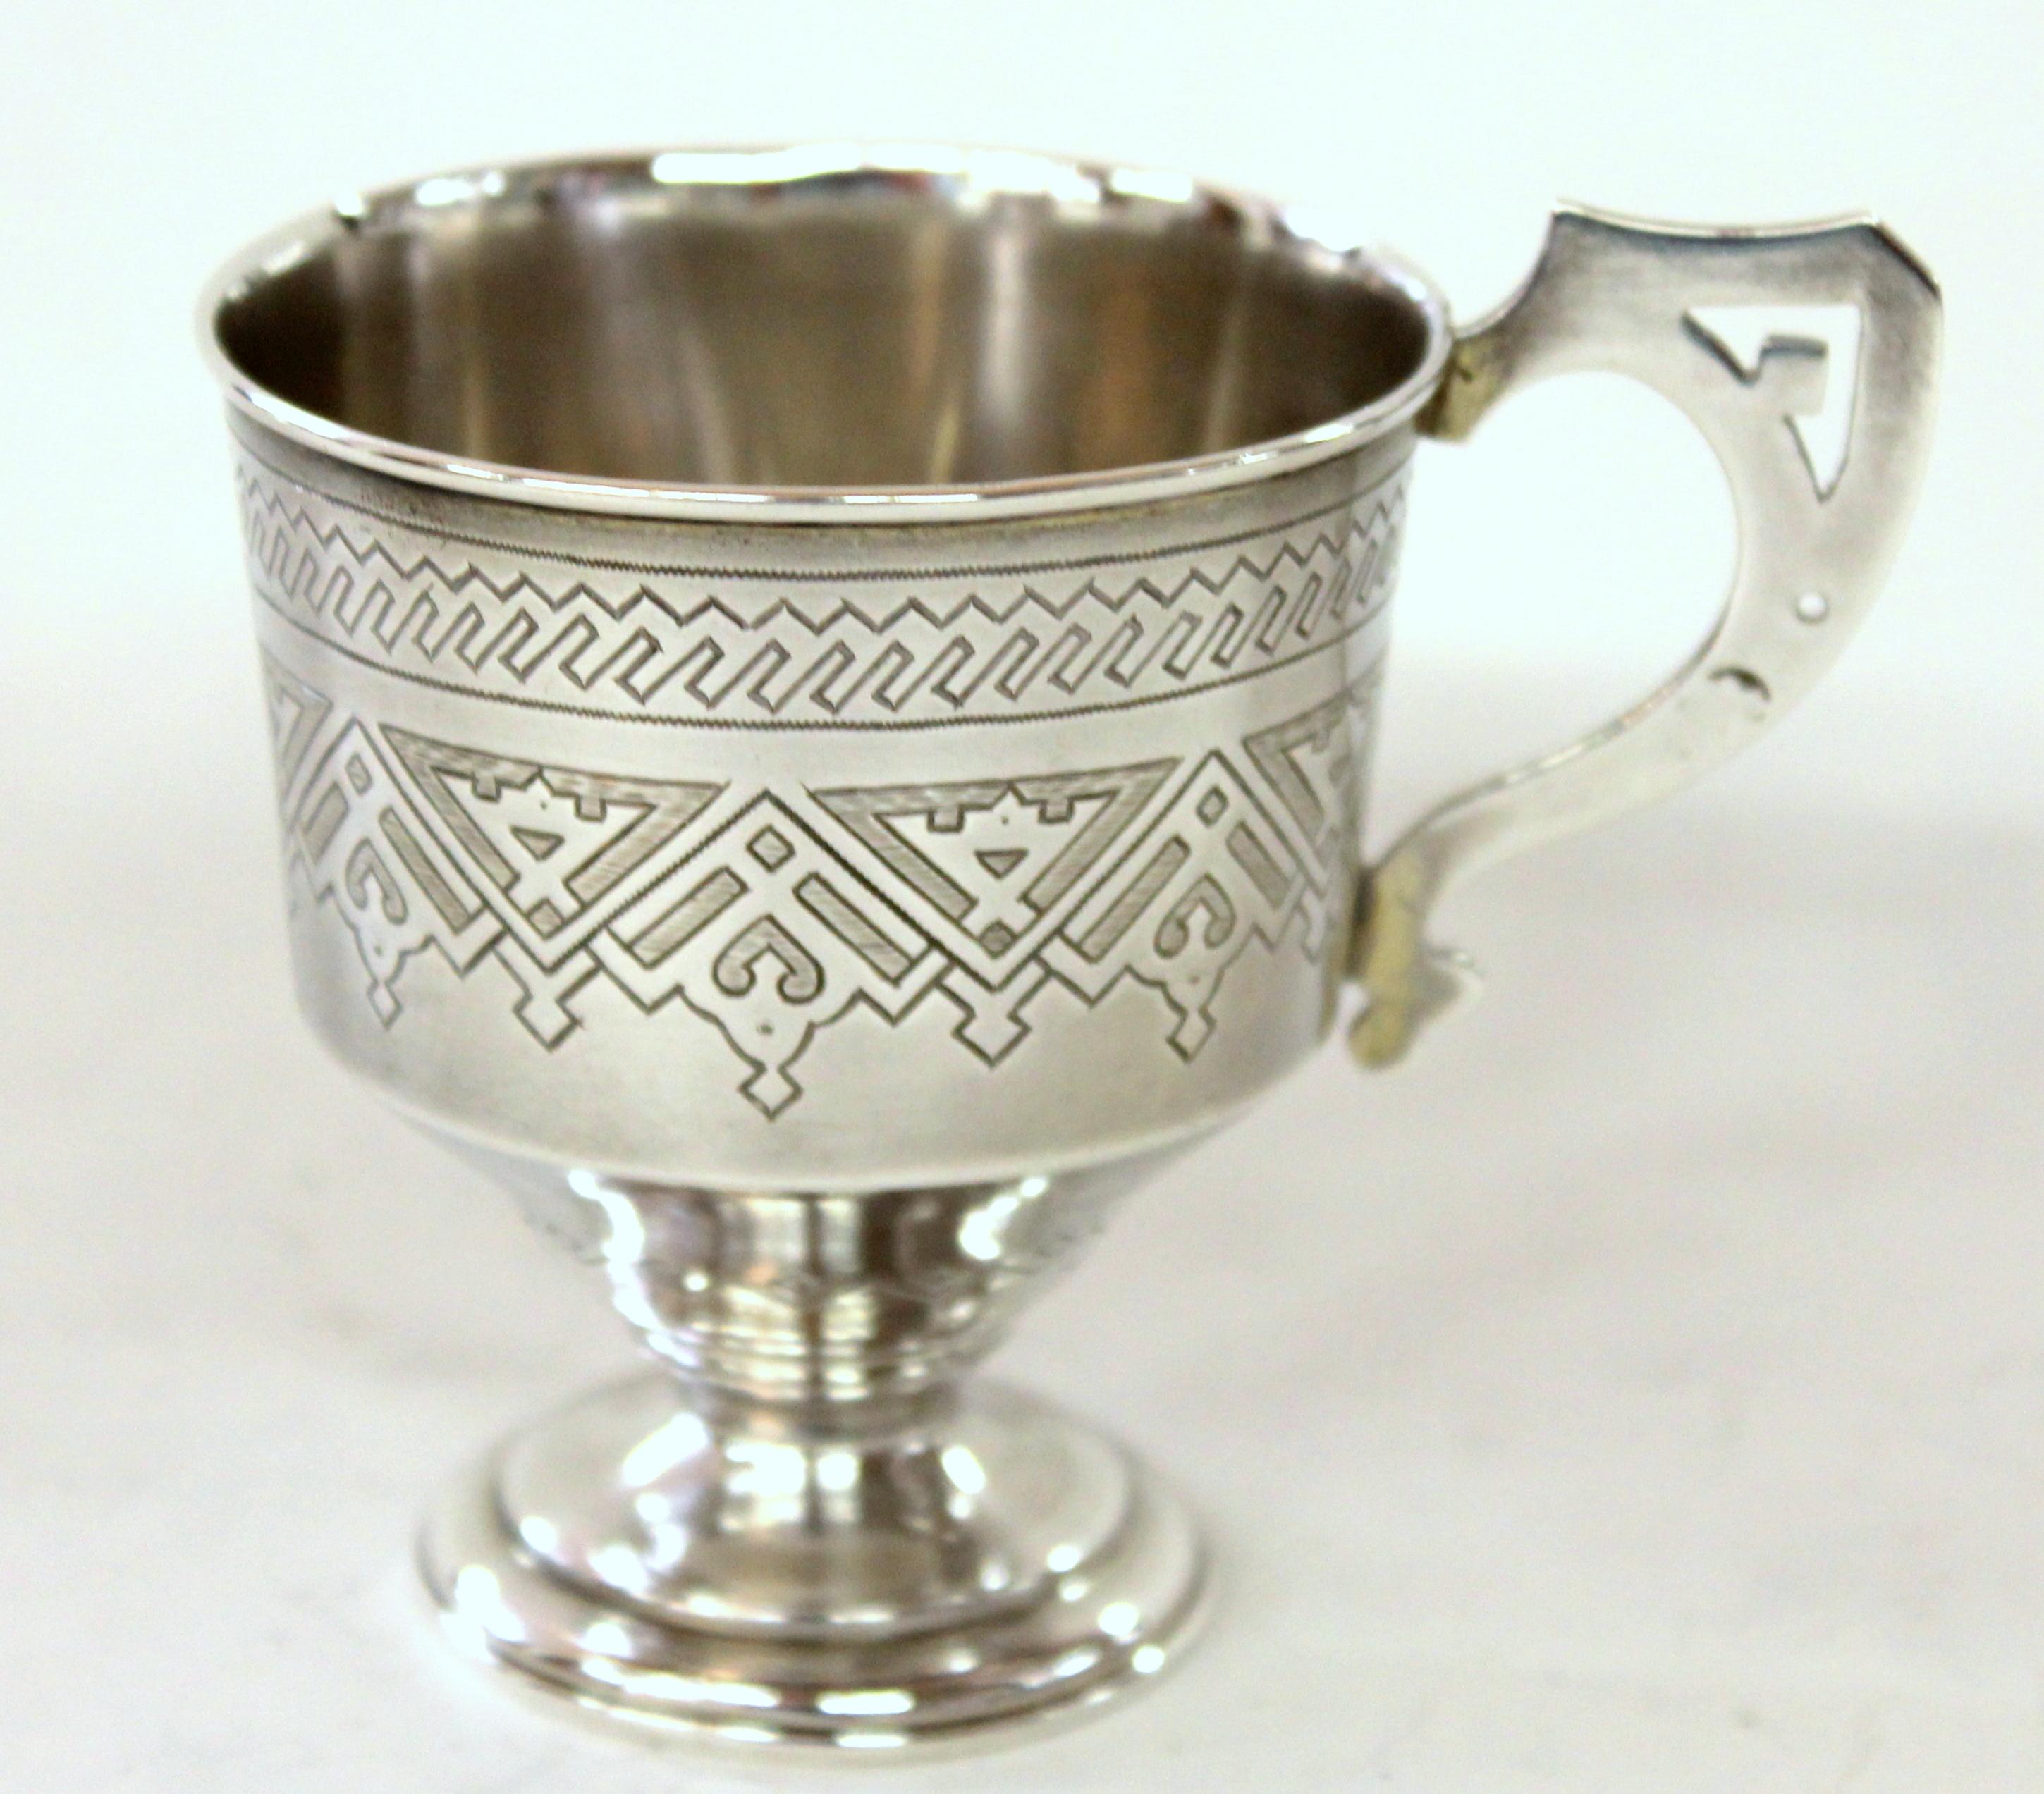 Antique Imperial Russian Silver Hand Engraved Cup and Saucer, Aleksandr Fuld For Sale 3